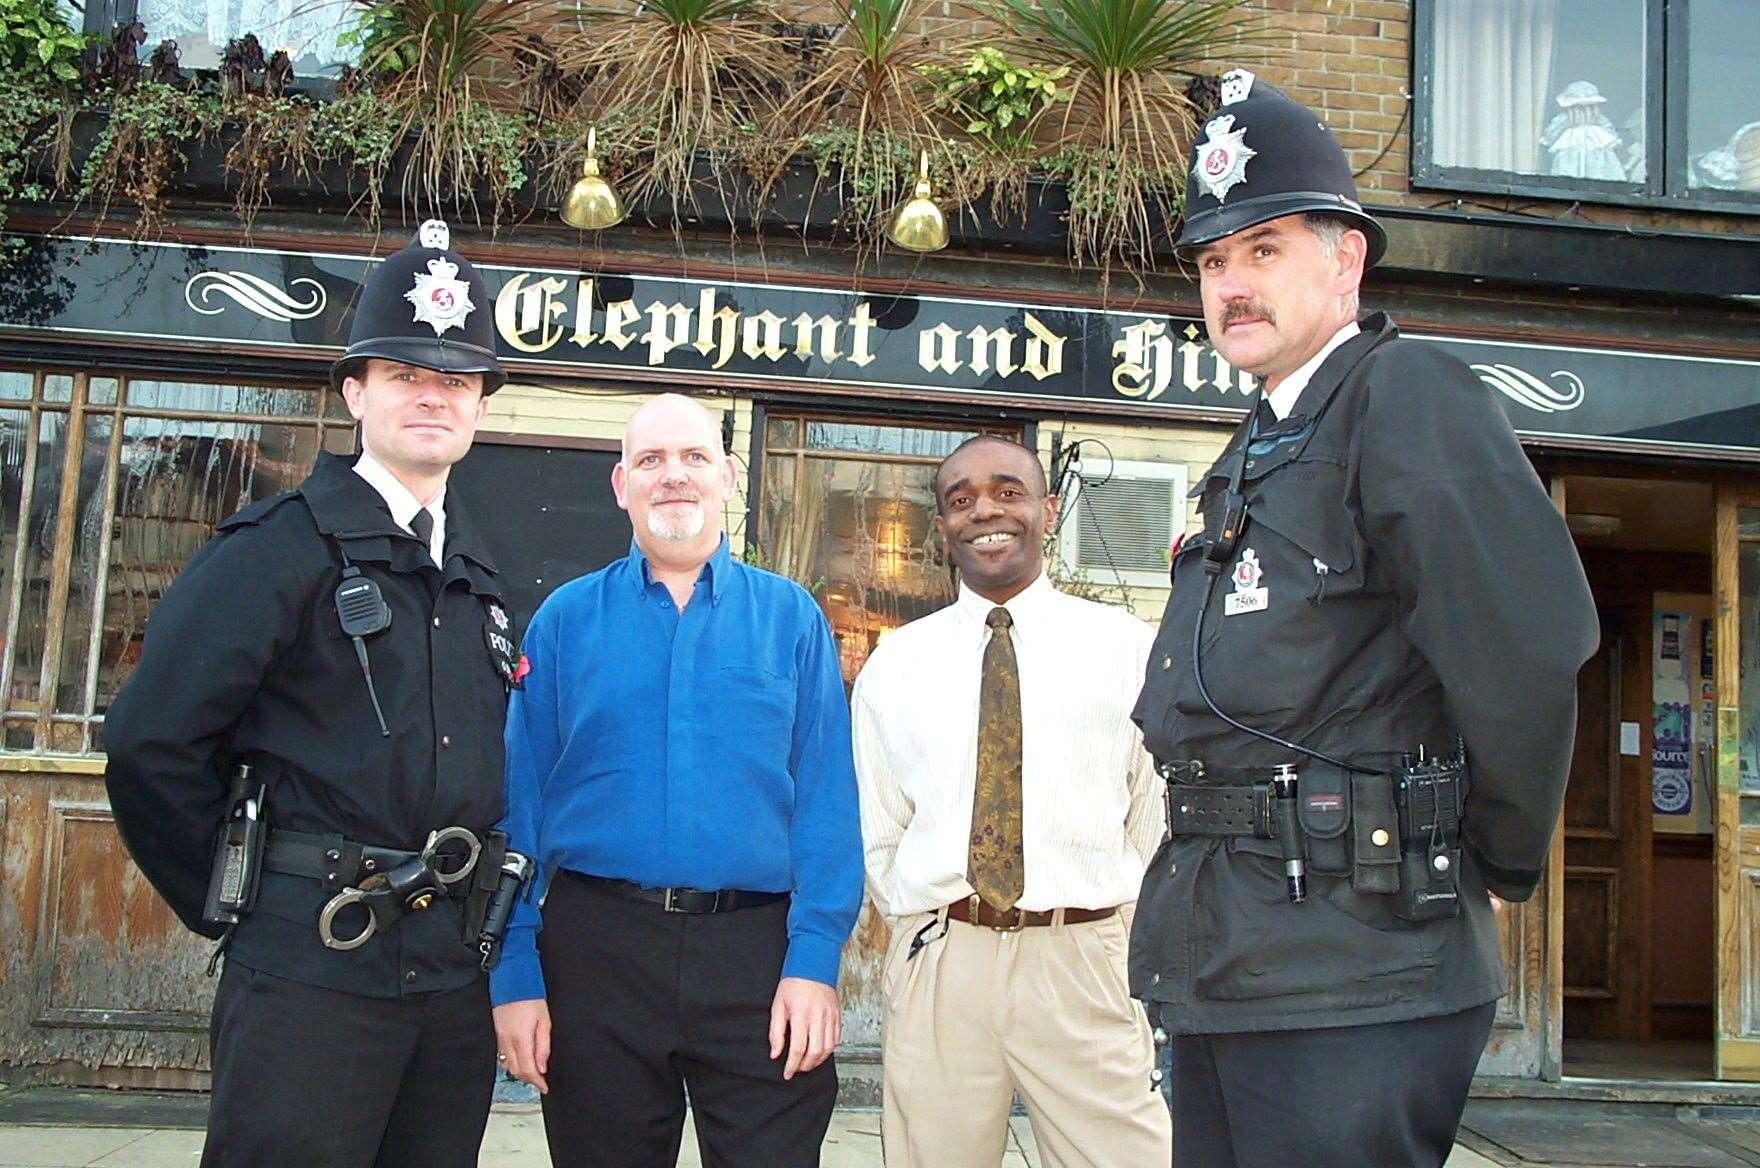 Town centre police officers Ian Woodland (left) and Alan Bugden with licensees Roy Gilham of the Prince Albert and Ken Brandy of the Elephant and Hind, who were among the first to join Dover's new Pubwatch scheme in November 2001. Both pubs are still operating